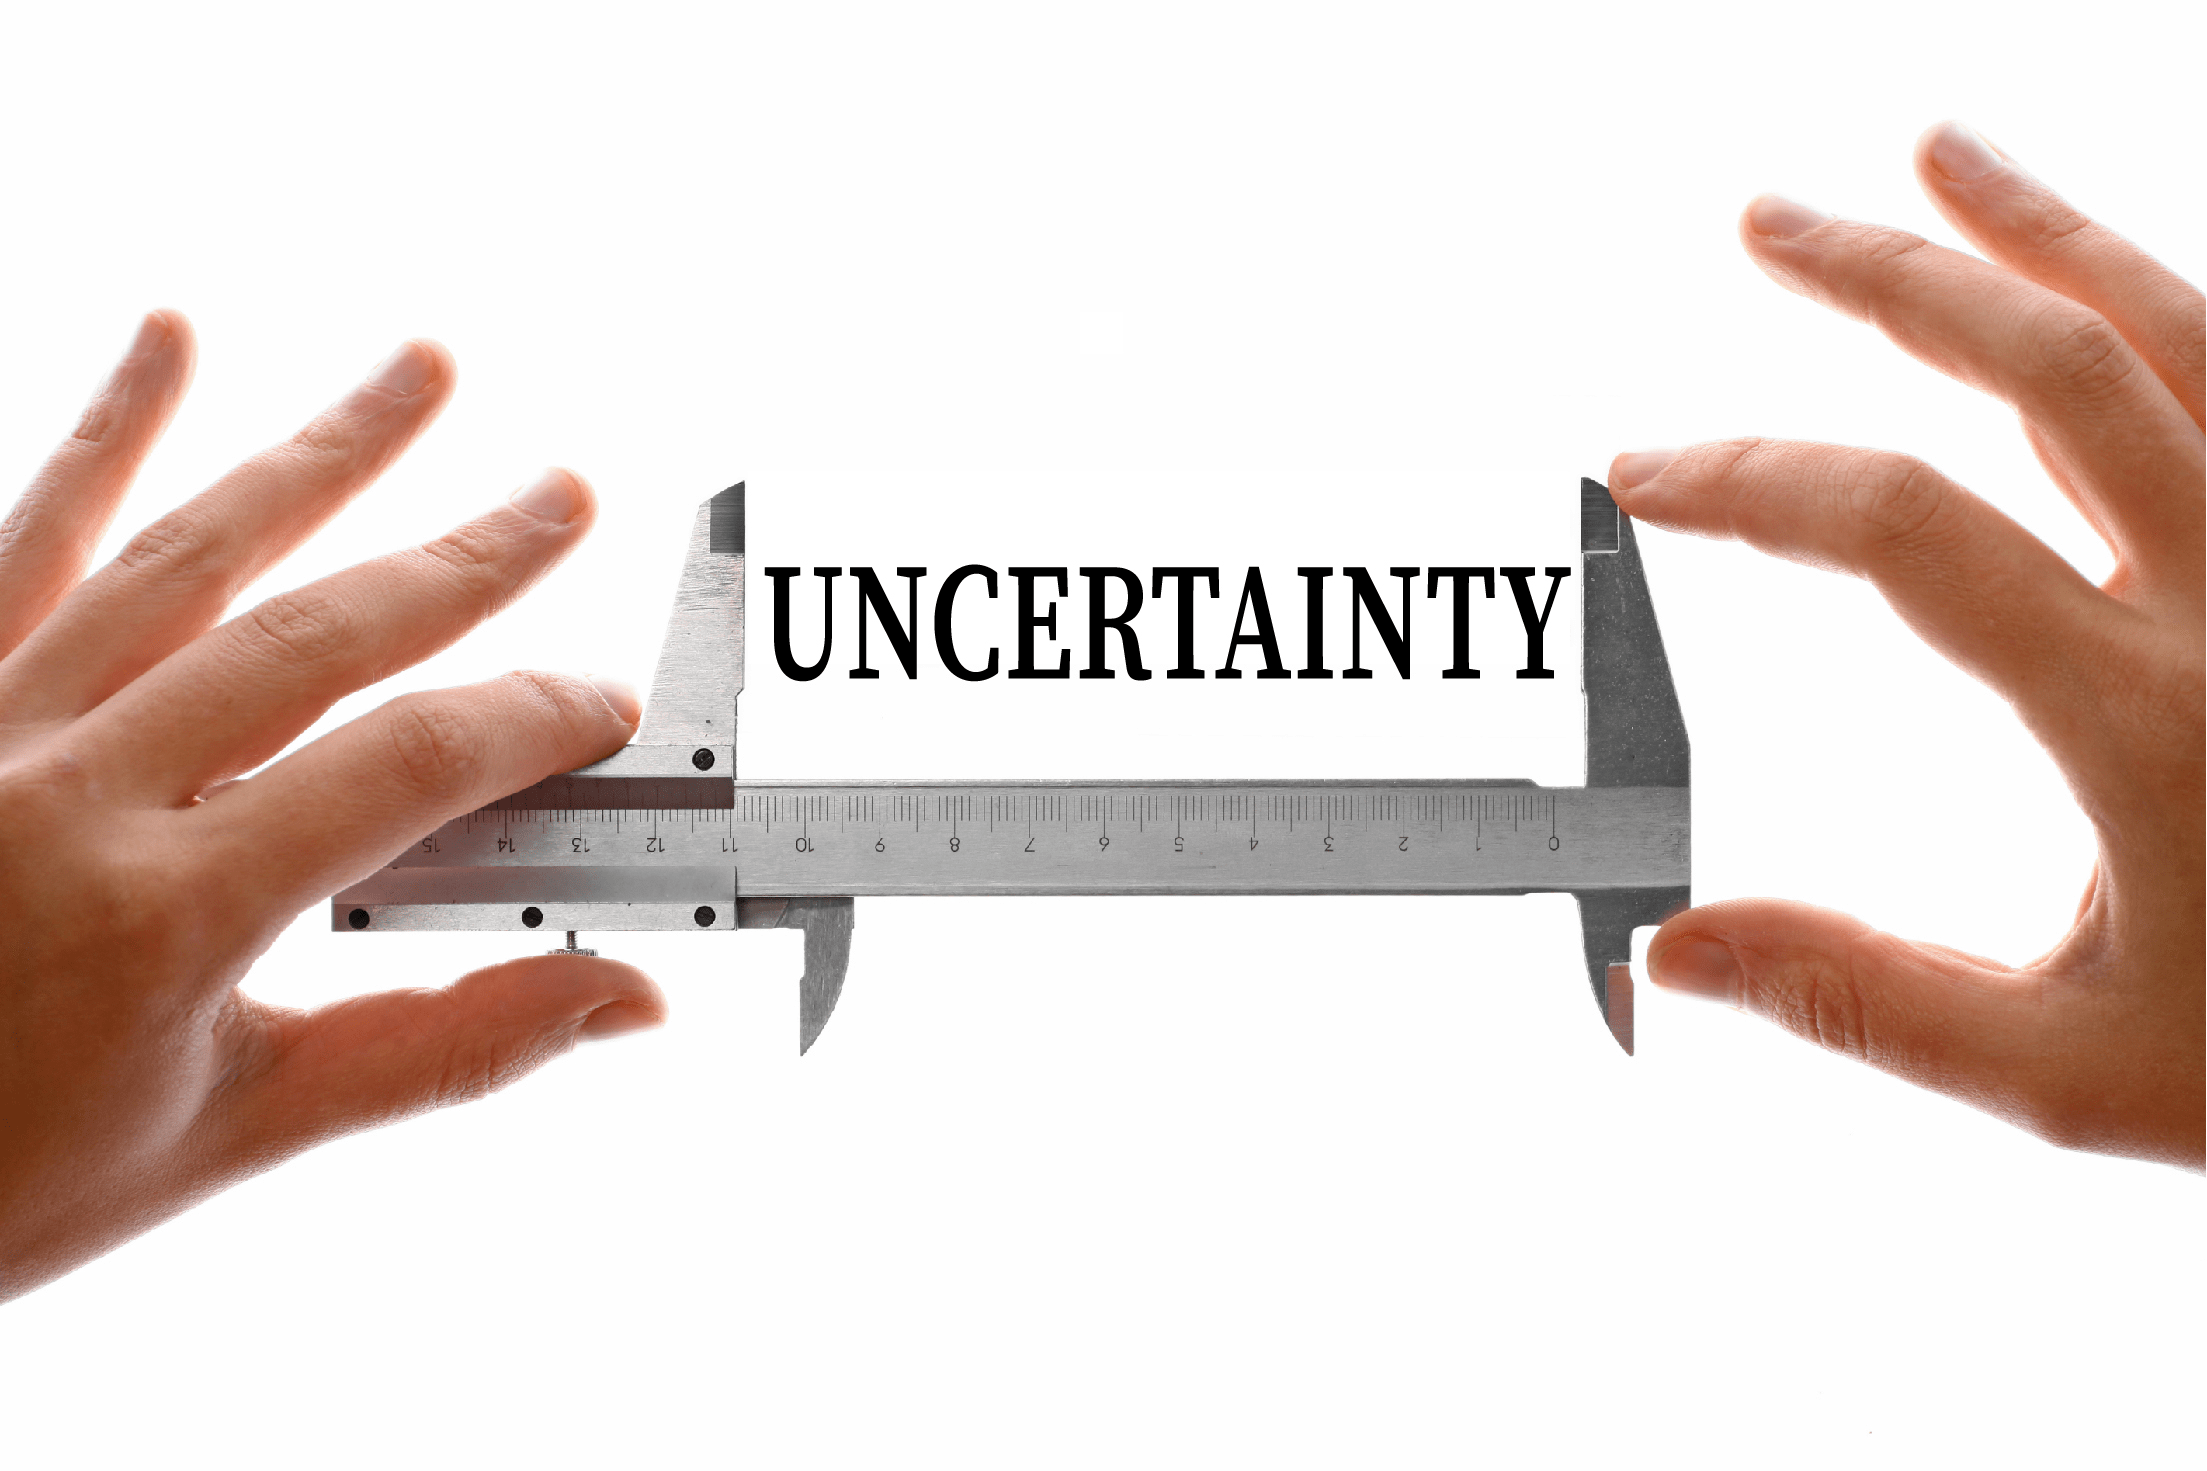 INTRODUCTION TO MEASUREMENT UNCERTAINTY